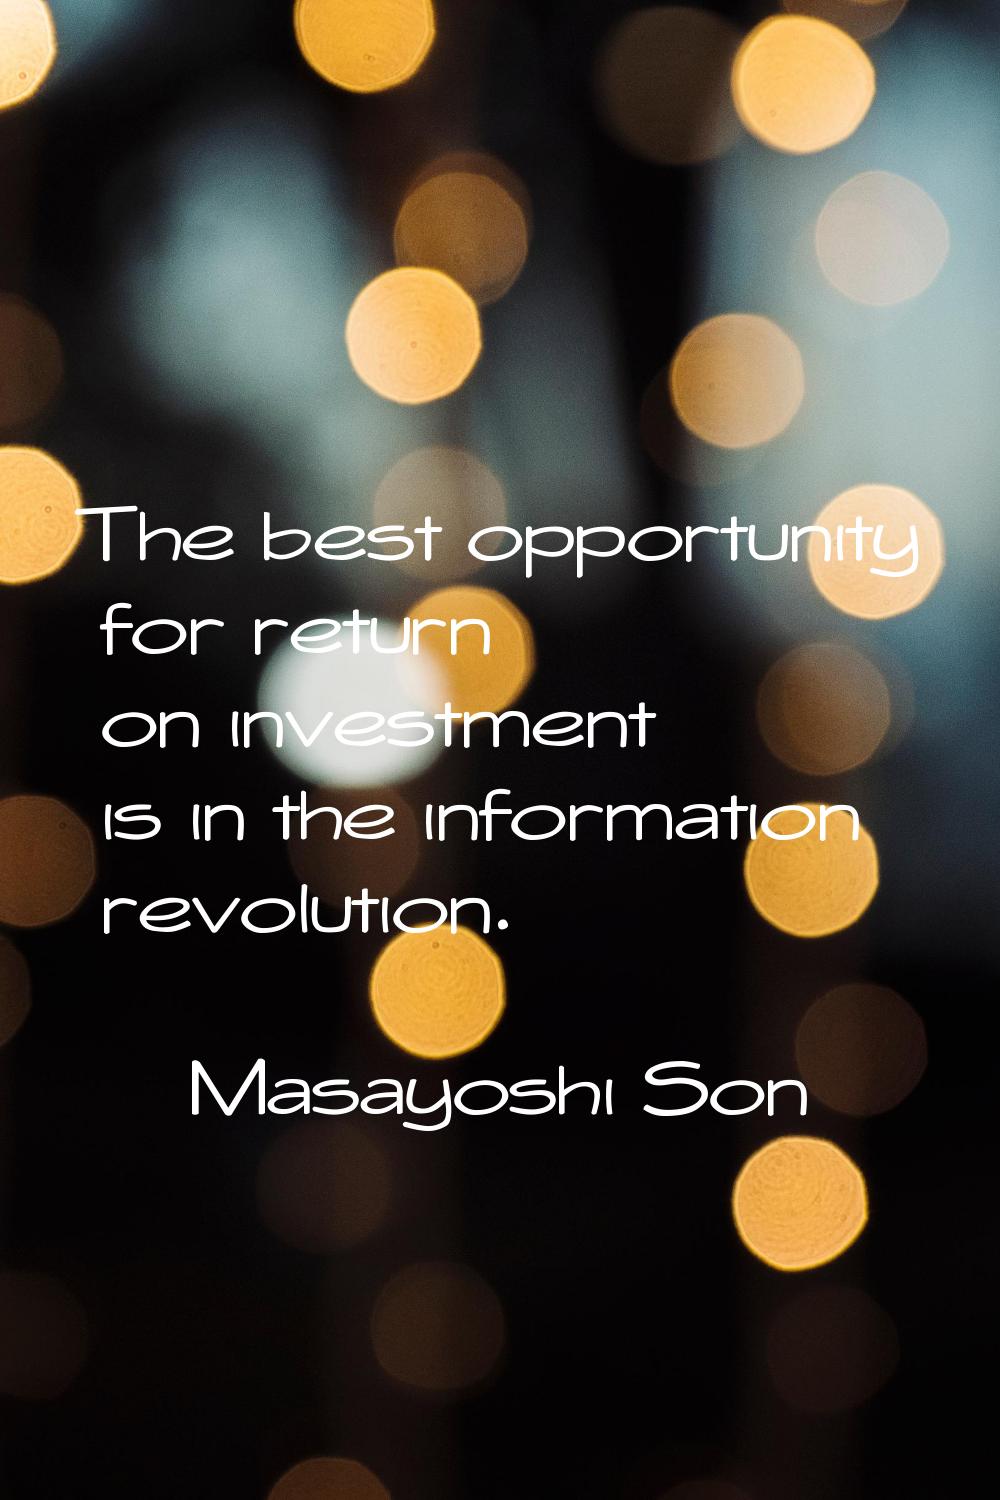 The best opportunity for return on investment is in the information revolution.